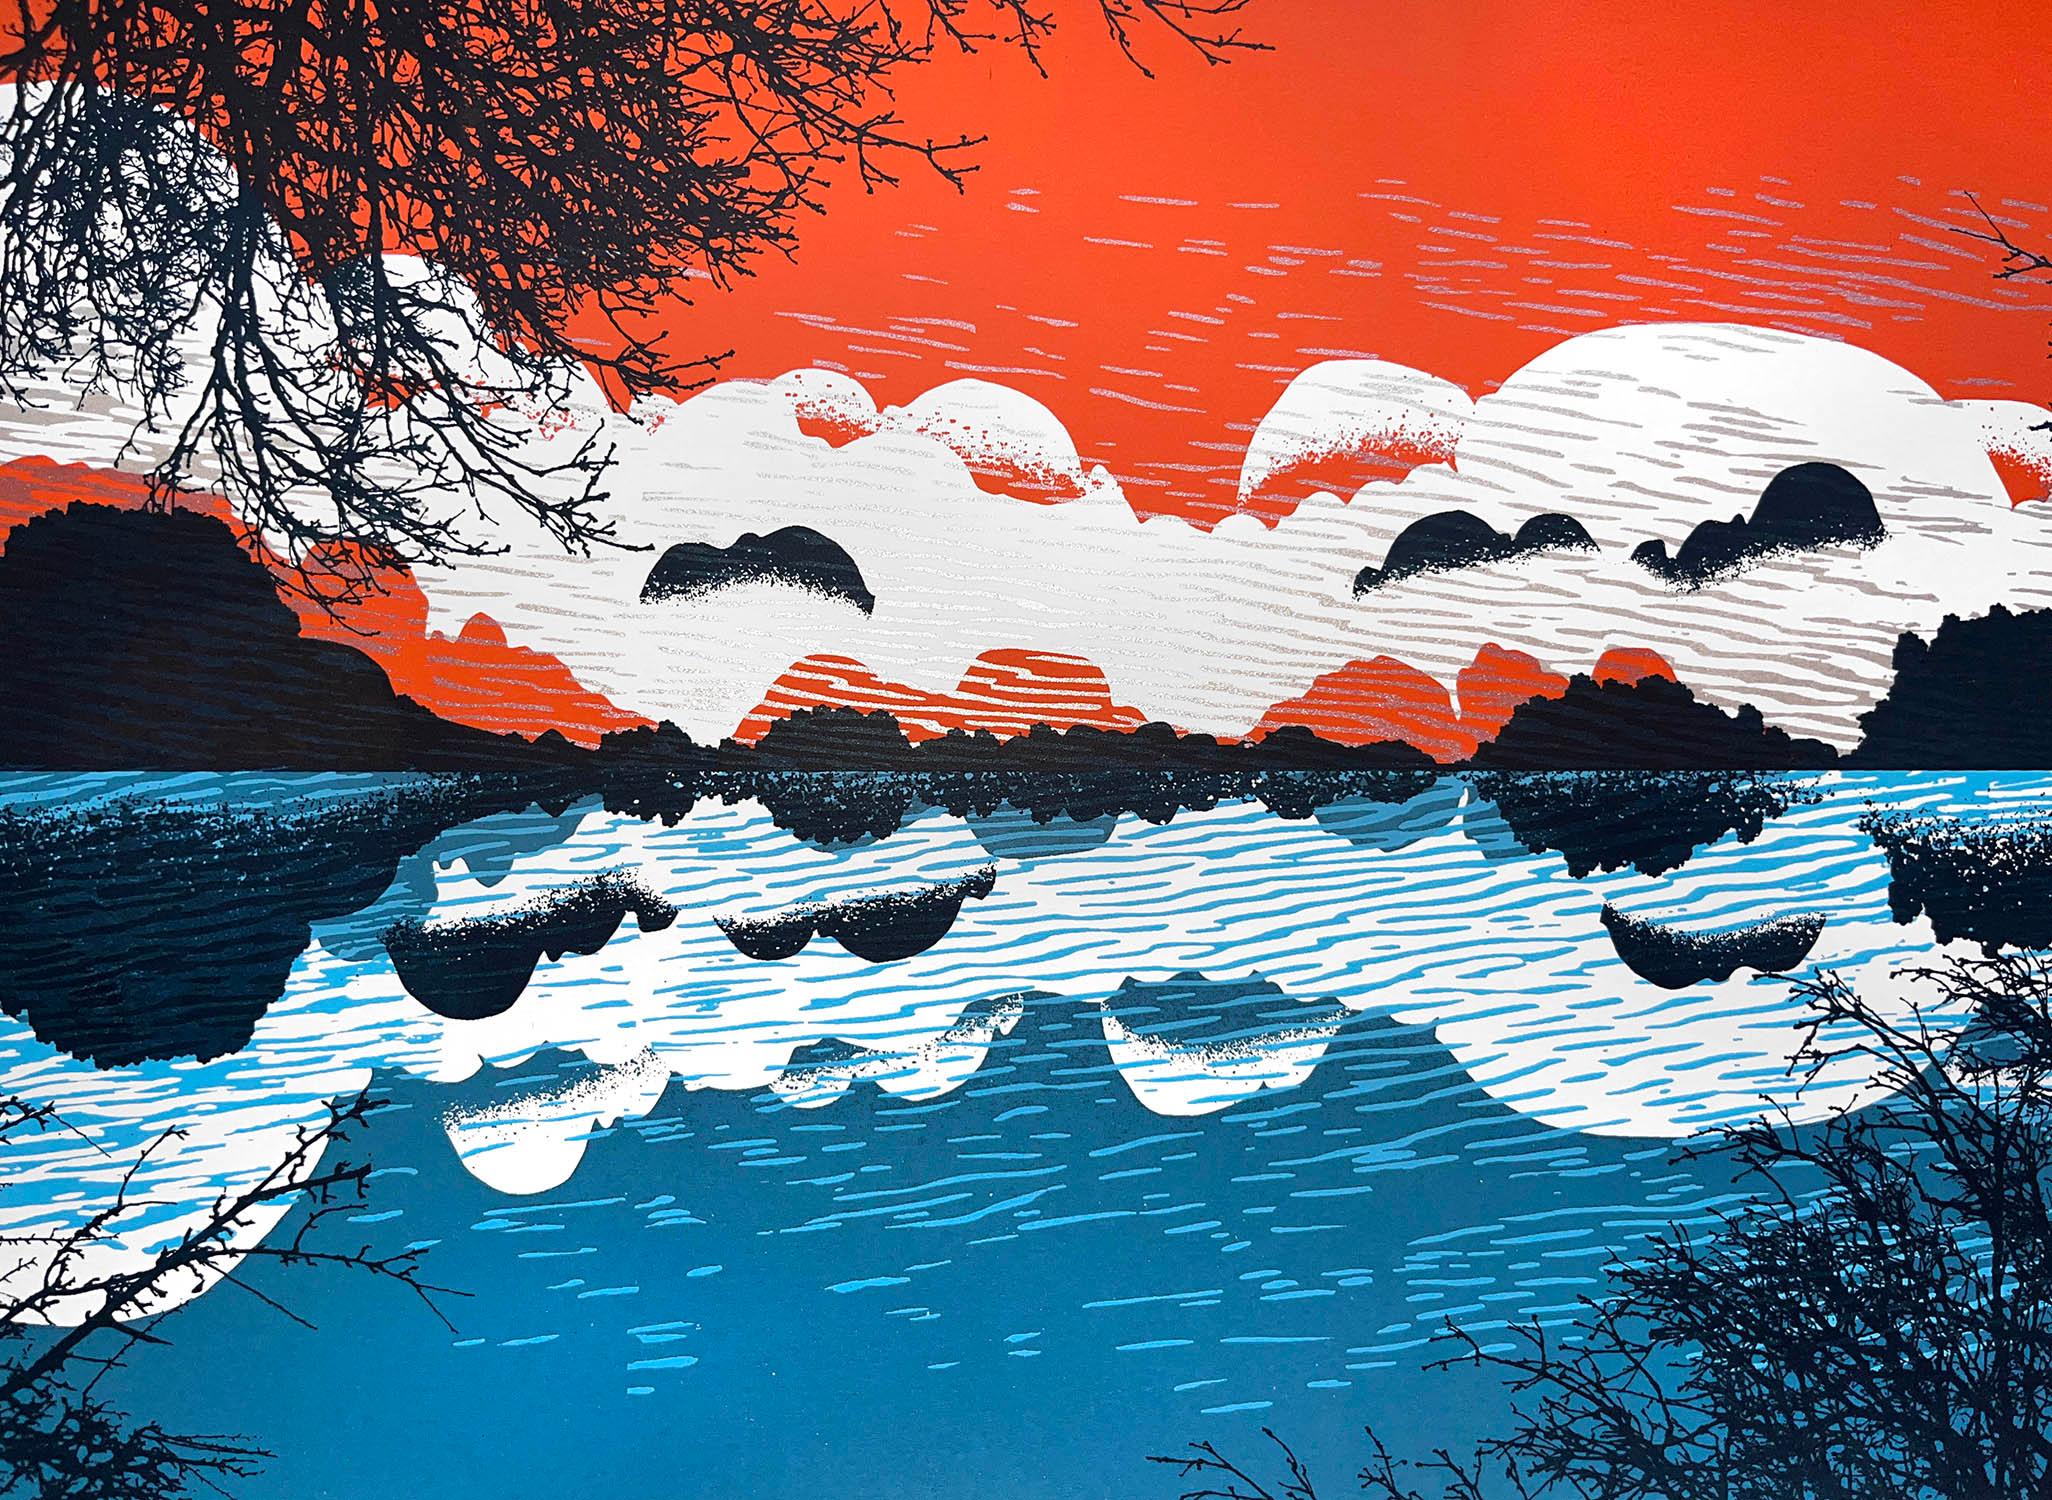 This five colour screen print illustrates a multi-layered seascape with interweaving water ripples dynamically interacting with a surreal imaginary landscape. Subtle mark-making edges hillsides into cloud patterns creating endless virtual